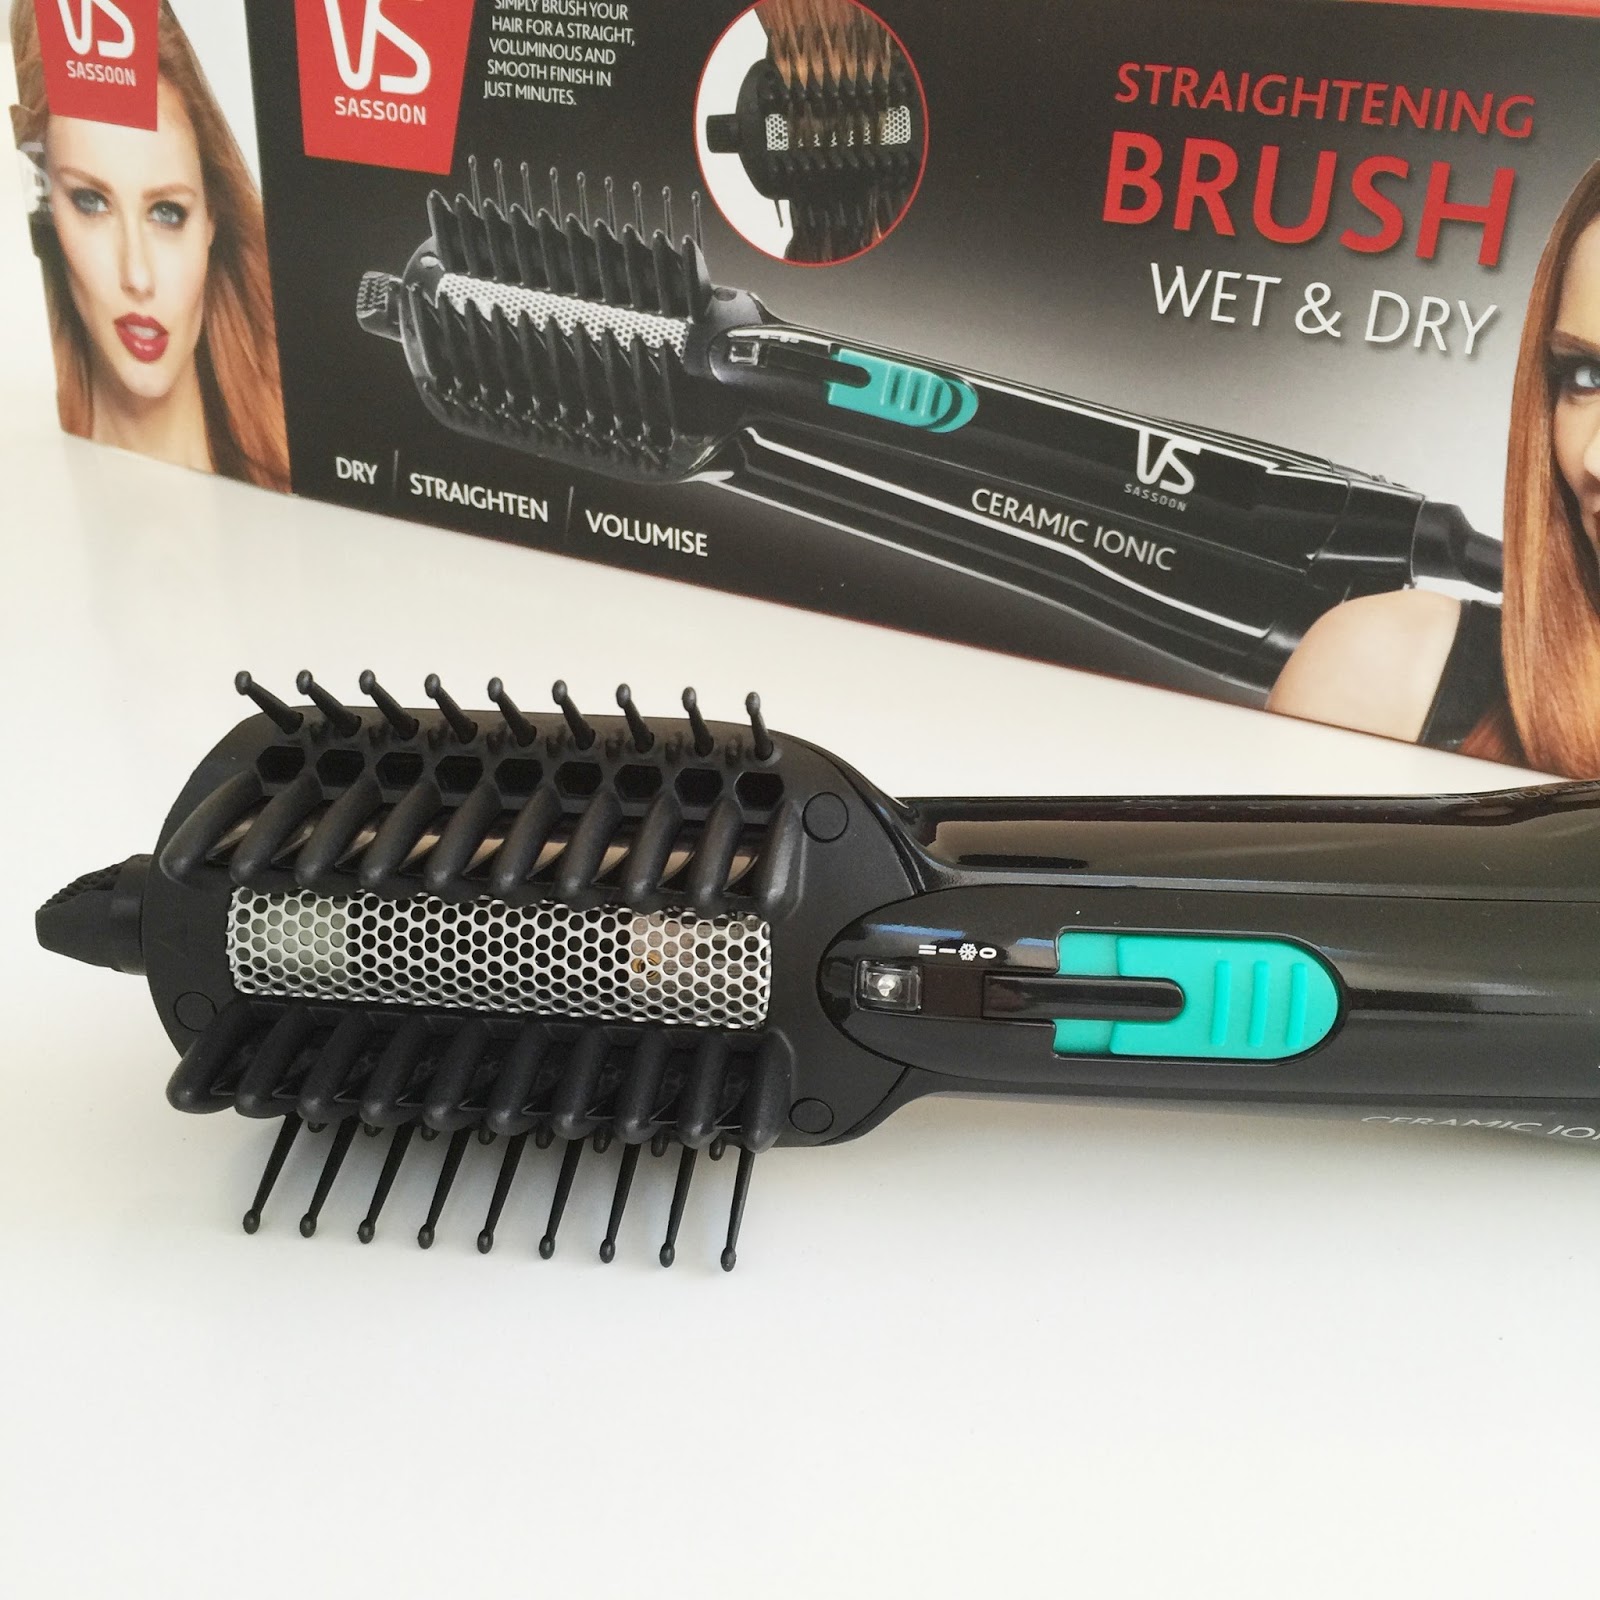 PRODUCT REVIEW: VS SASSOON WET AND DRY STRAIGHTENING BRUSH | The Beauty &  Lifestyle Hunter